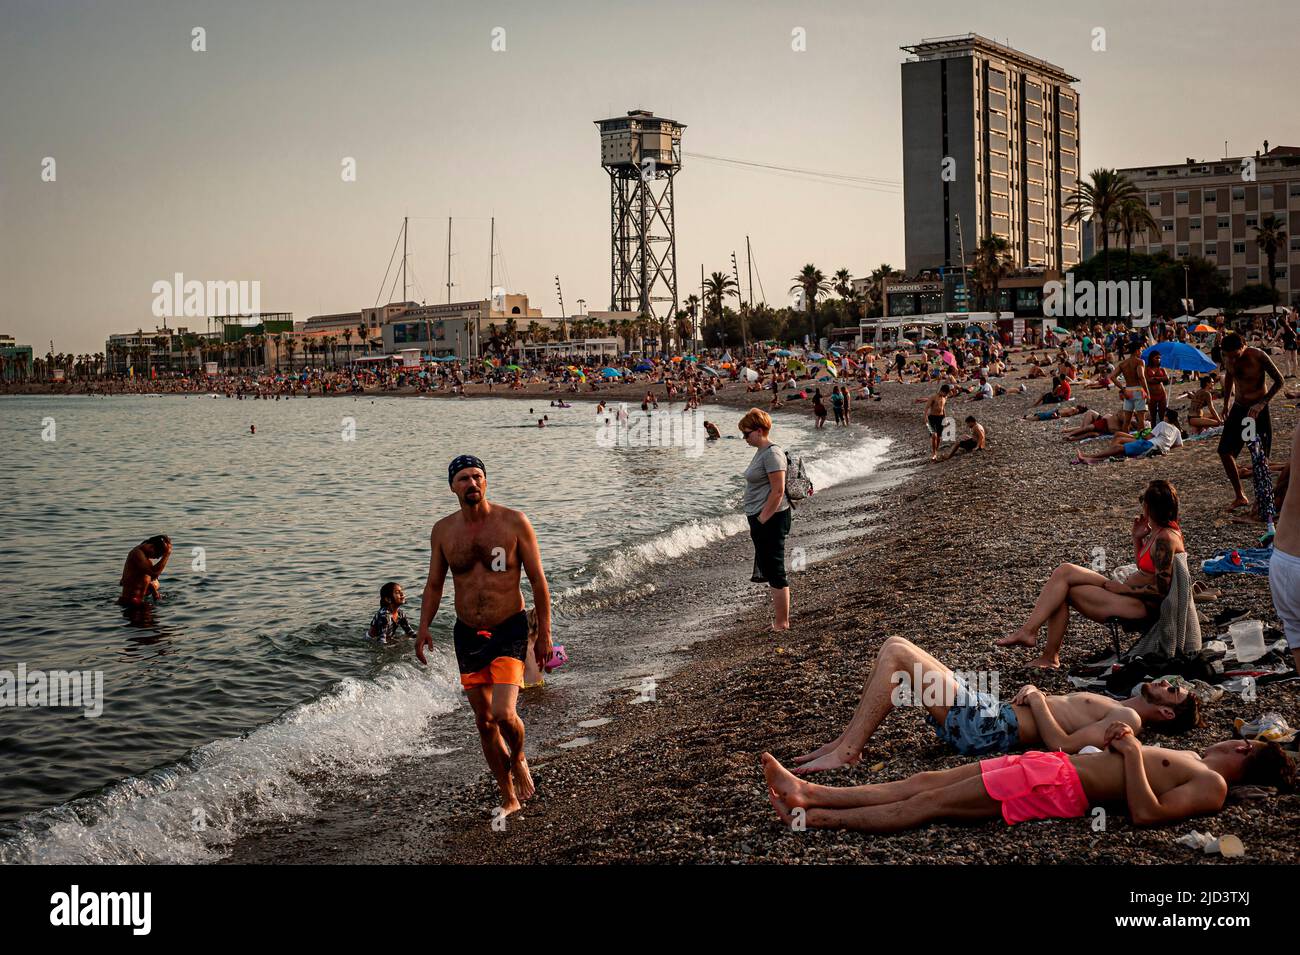 Barcelona, Spain. 17th June, 2022. June 17, 2022, Barcelona, Spain: People cool off at the Barceloneta beach in Barcelona as a heat wave is underway in parts of Western Europe, with widespread temperatures near or above 104 degrees Fahrenheit (40 Celsius) expected through the weekend. Current heatwave brings abnormally high temperatures for June days in Spain. Credit:  Jordi Boixareu/Alamy Live News Credit:  Jordi Boixareu/Alamy Live News Stock Photo